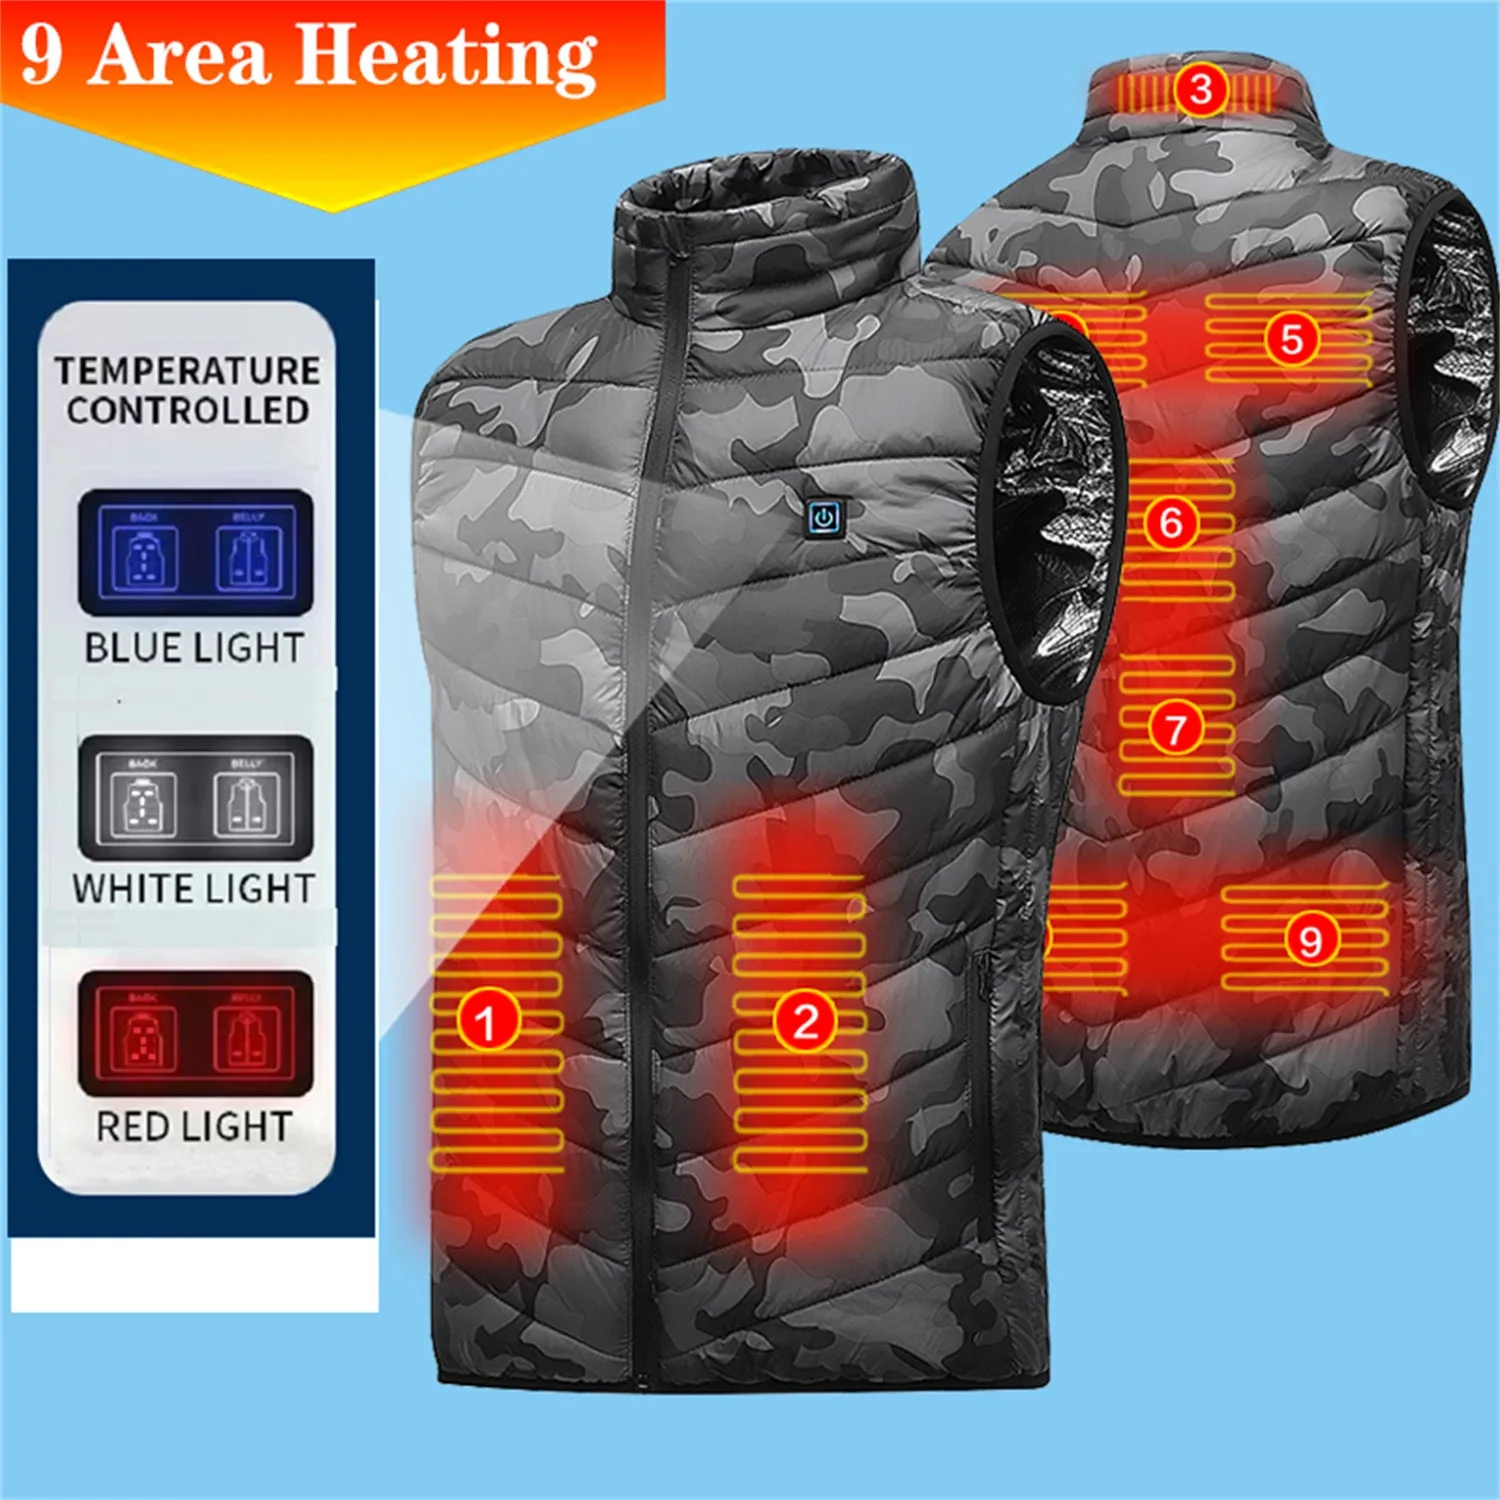 

Vest jackets Newly Upgraded Single Control 9 Heating 3 Gear Adjustment Constant Temperature Intelligent Electric Heating Vest